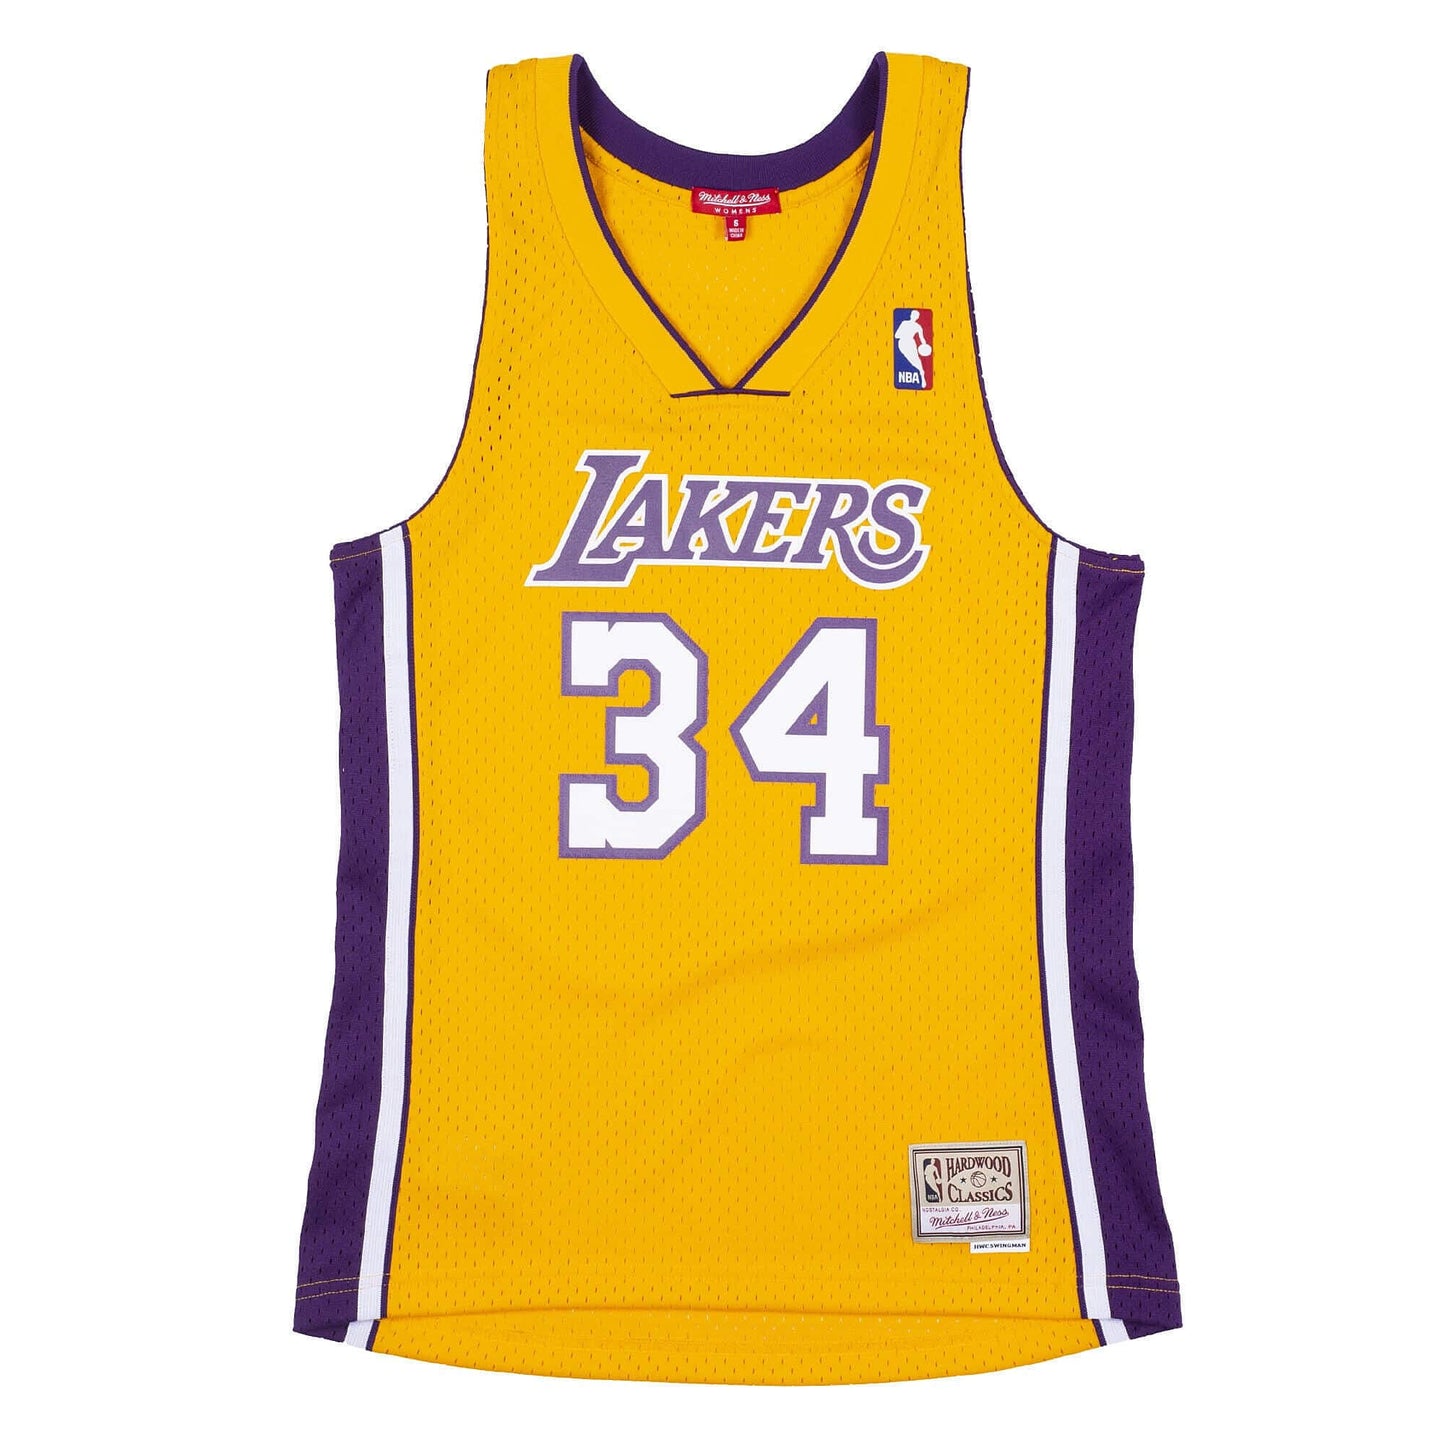 Mitchell & Ness NBA Womens Swingman Jersey LOS ANGELES LAKERS SHAQUILLE O'NEAL LIGHT GOLD